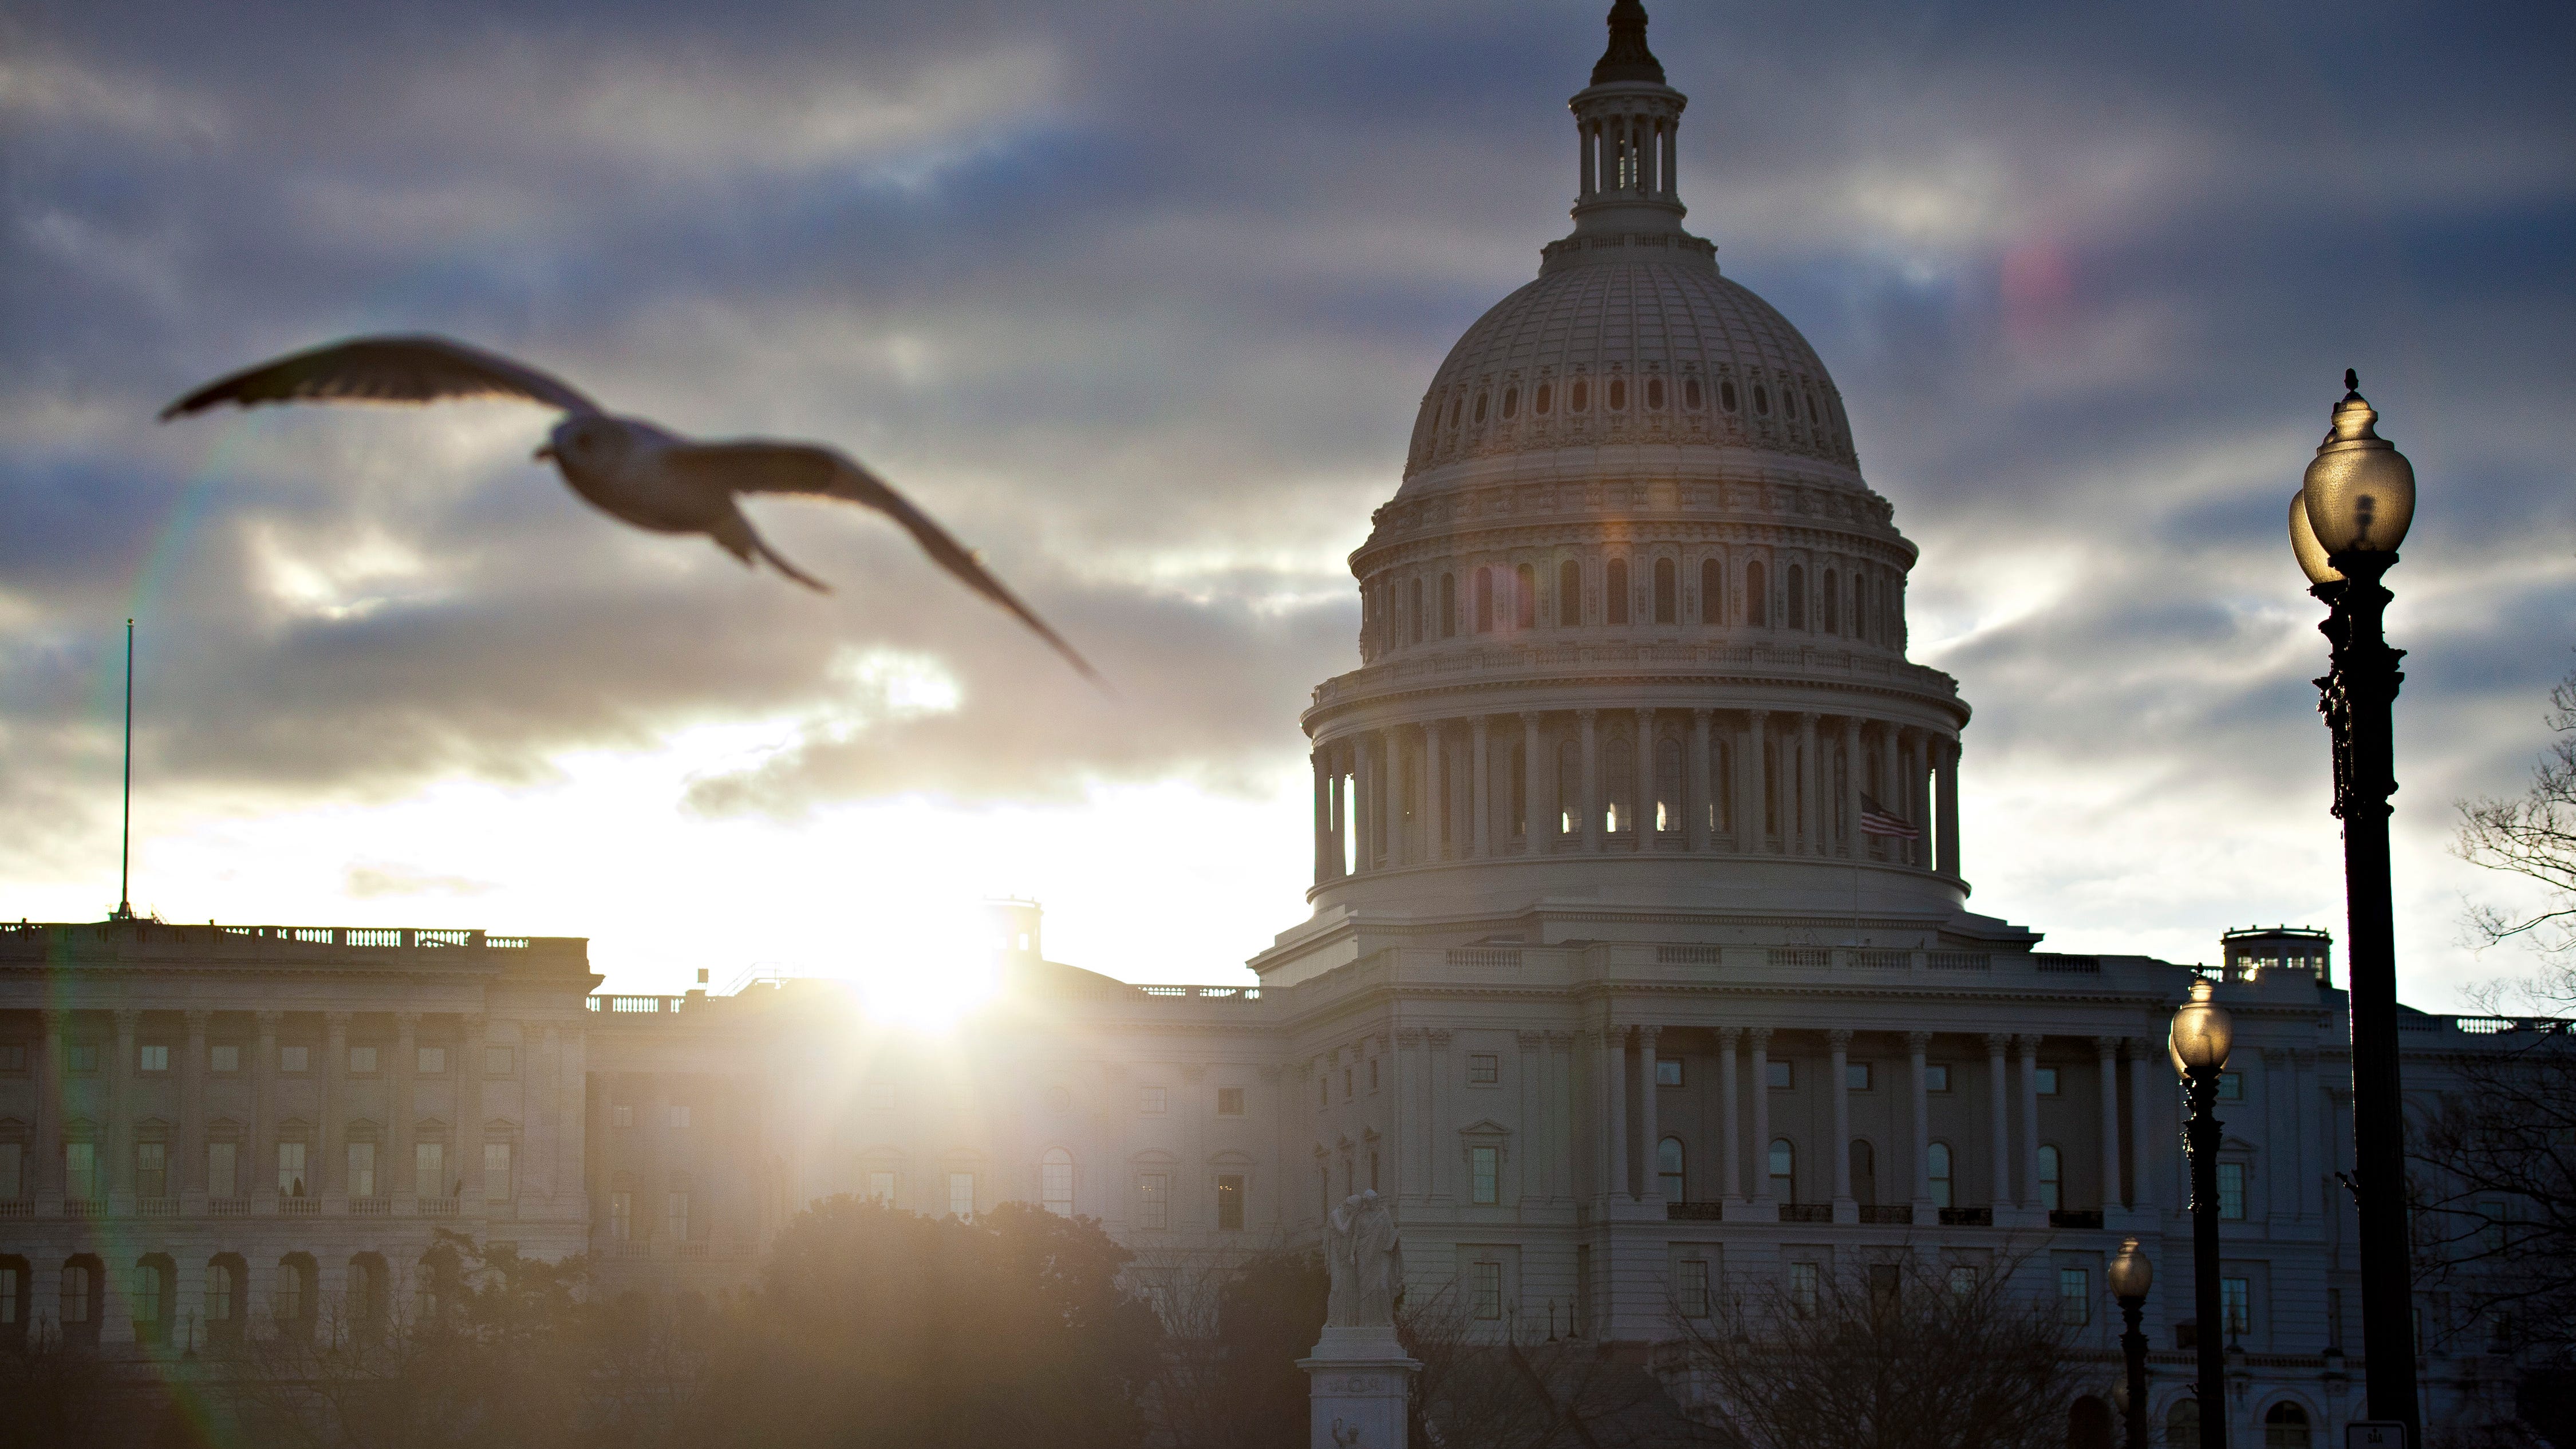 FILE – In this March 7, 2013, file photo the sun breaks through clouds over the U.S. Capitol in Washington in 2013. Daylight-saving time begins at 2 a.m. Sunday, when clocks officially move ahead an hour. (AP Photo/J. Scott Applewhite, File)